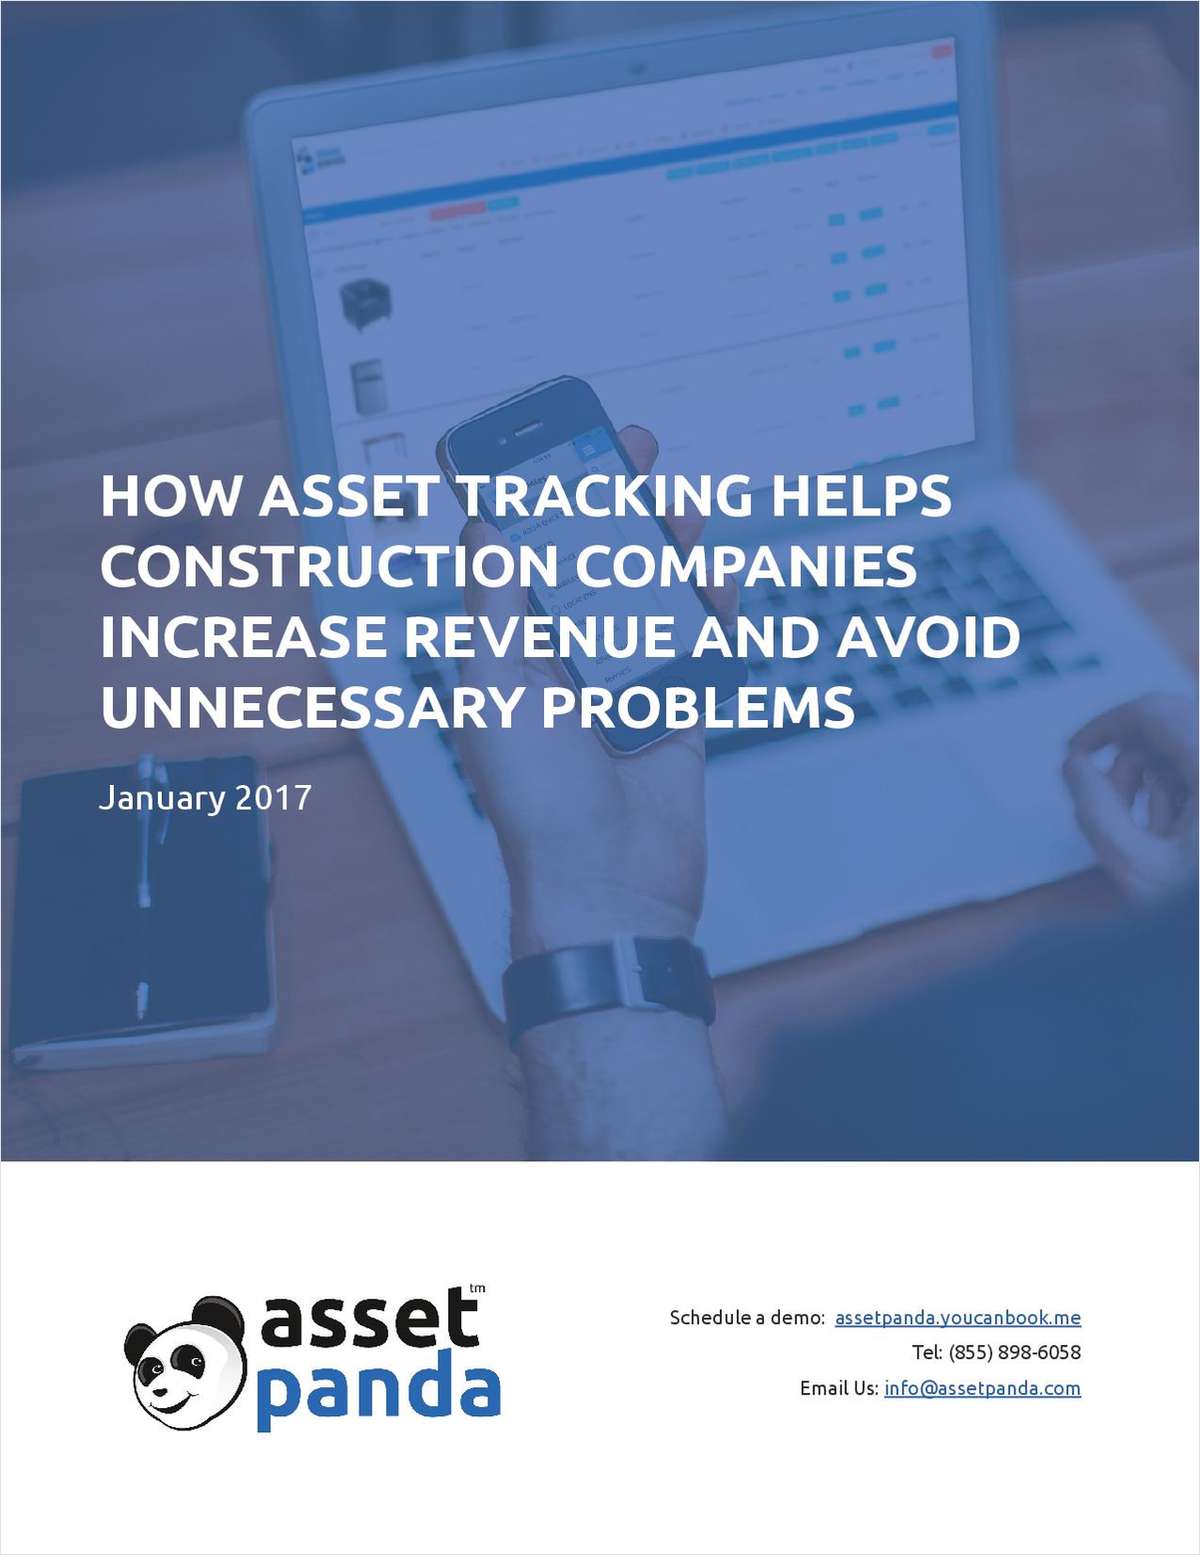 How Asset Tracking Helps Construction Companies Increase Revenue and Avoid Unnecessary Problems